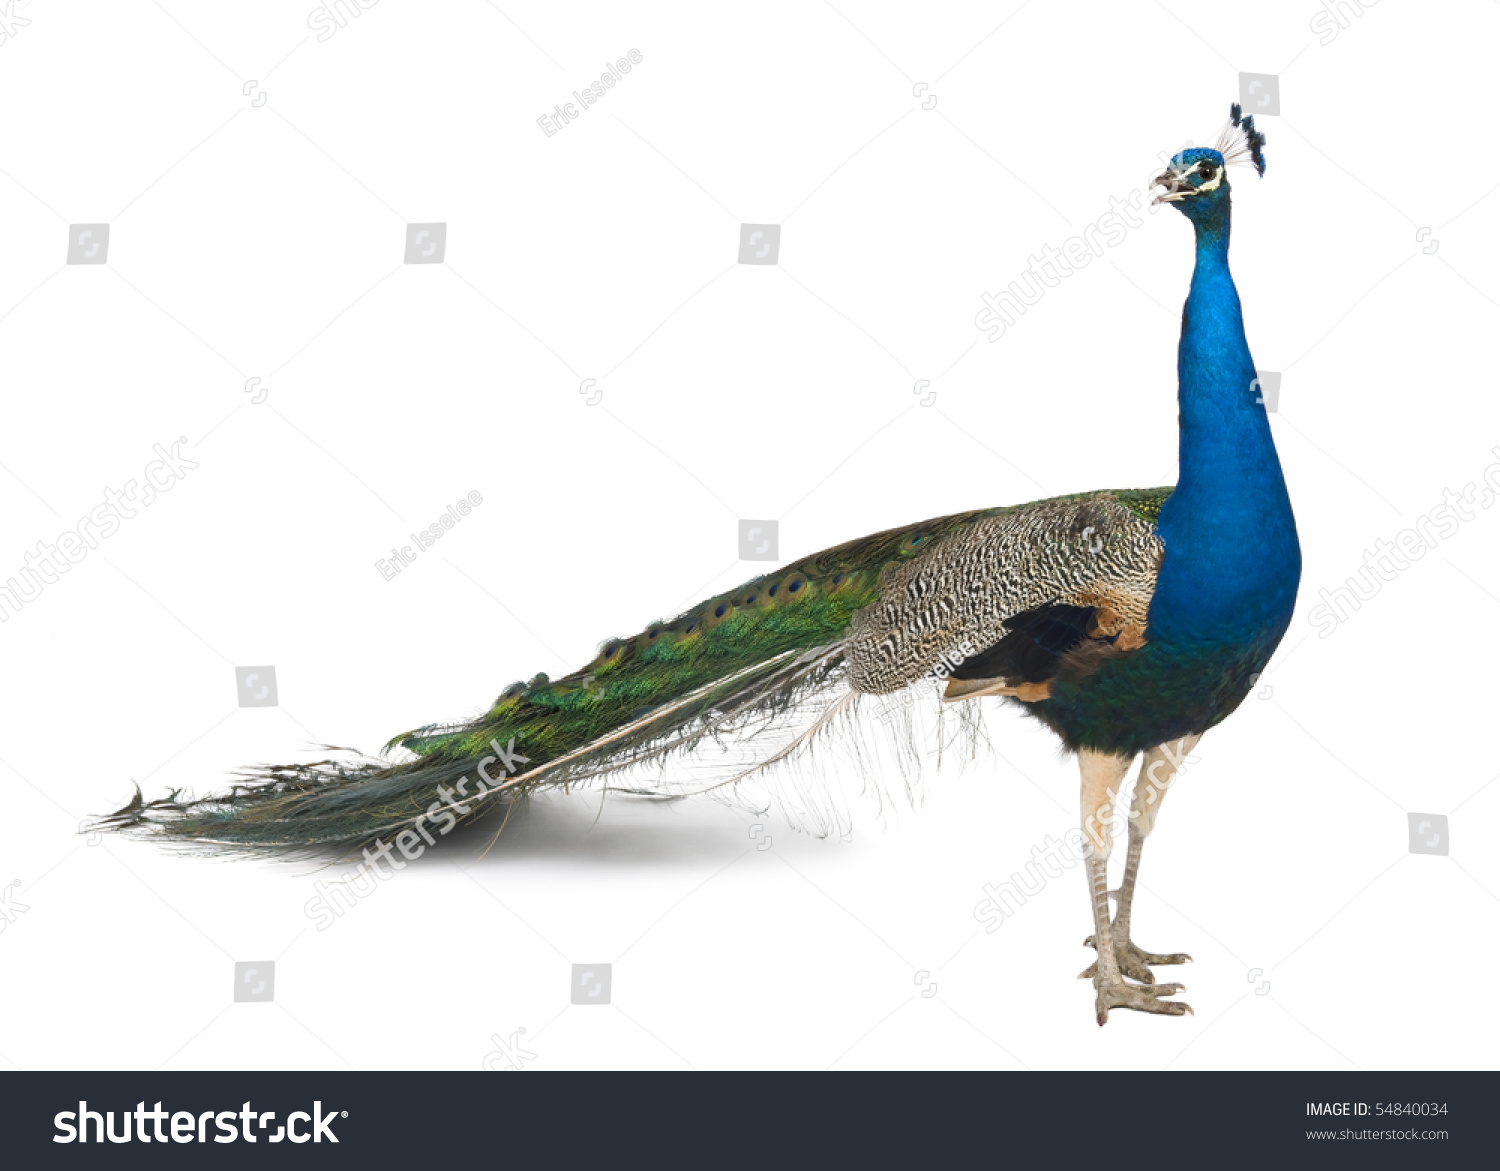 Male Indian Peafowl in front of white background #54840034